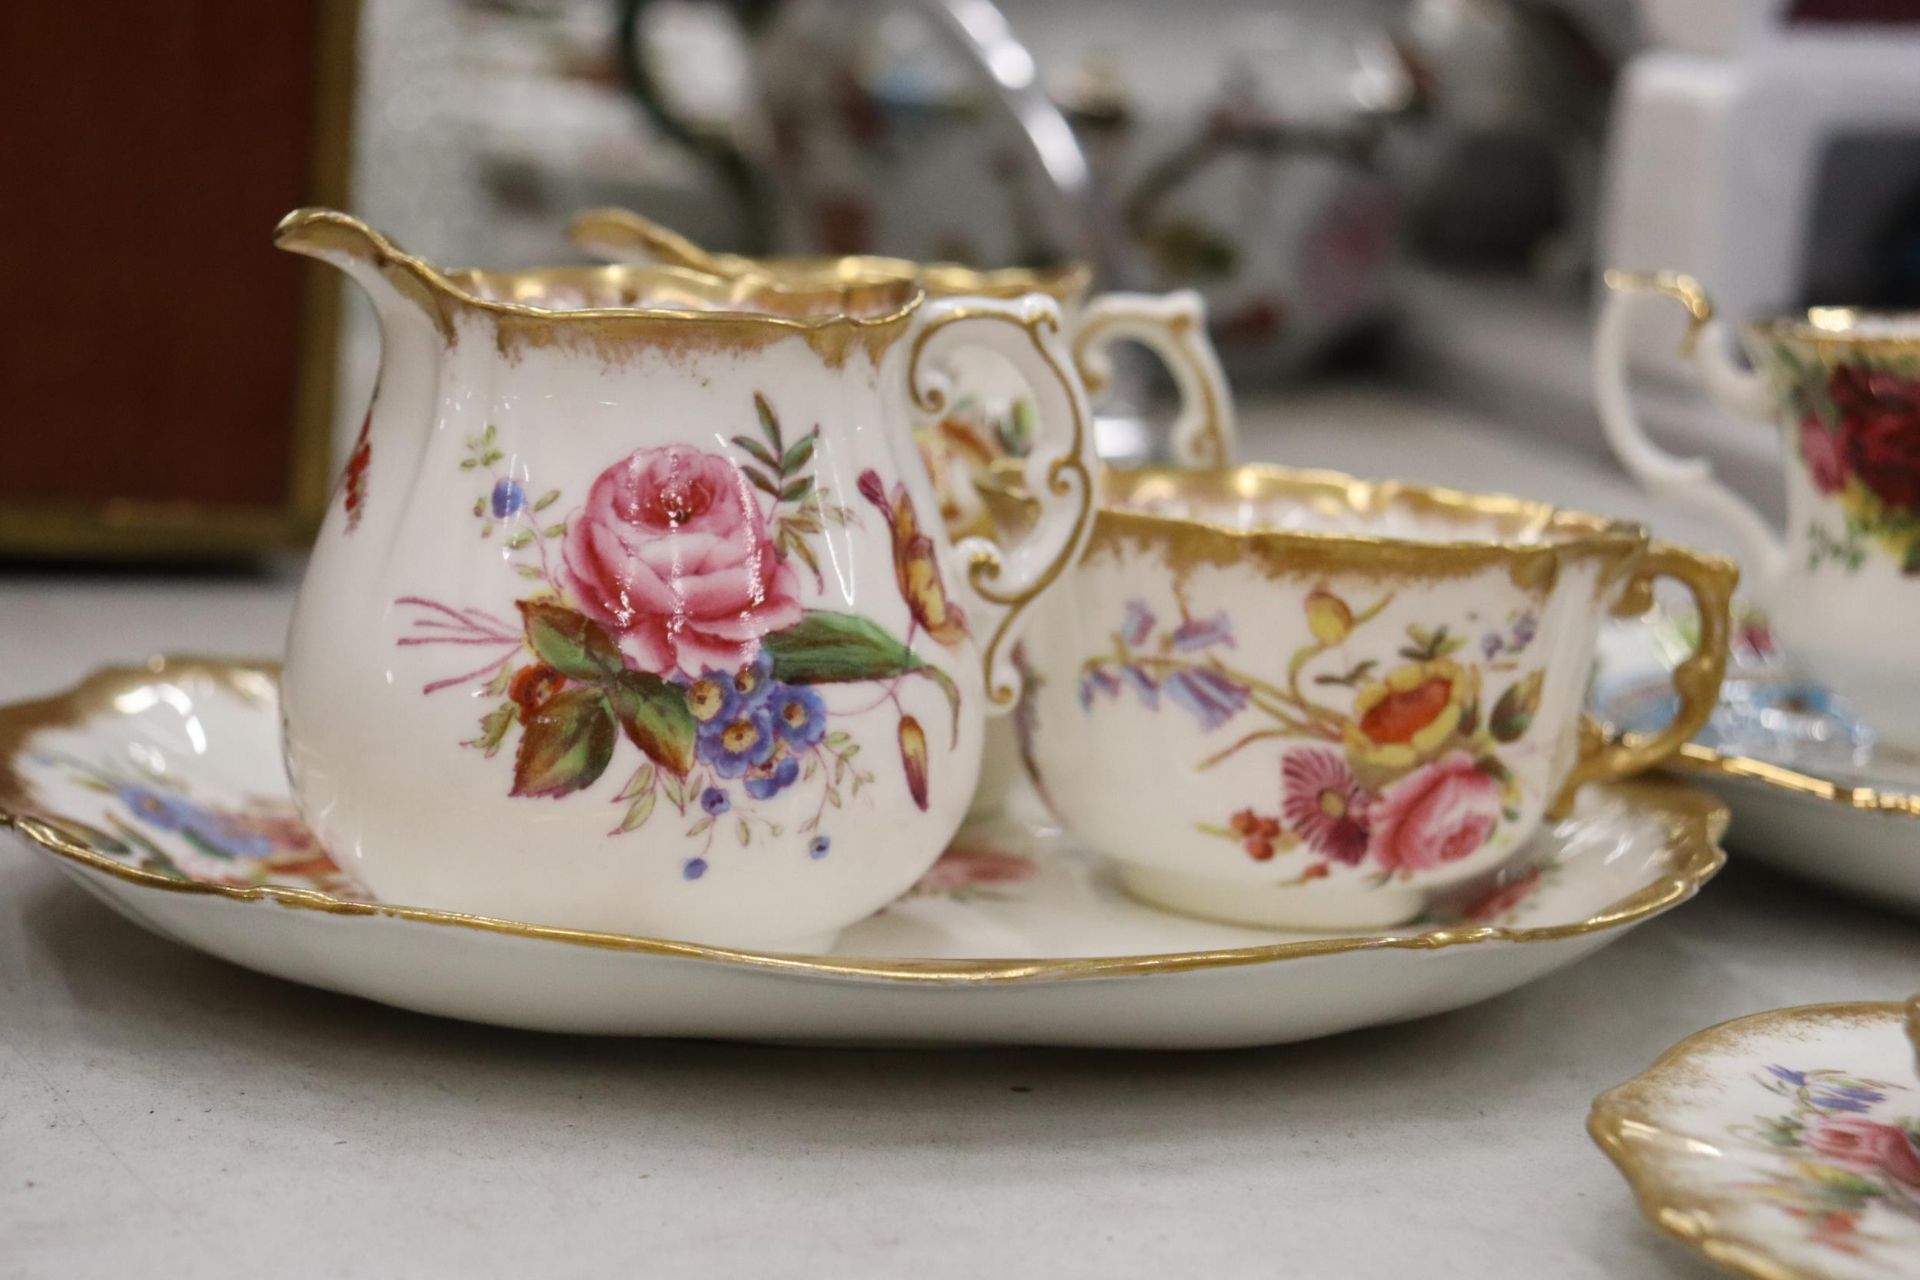 A 15 PIECE PART TEASET HAMMERSLEY AND CO TOGETHER WITH AN OLD ROYAL ALBERT COUNTRY ROSES CAKE PLATES - Image 5 of 10